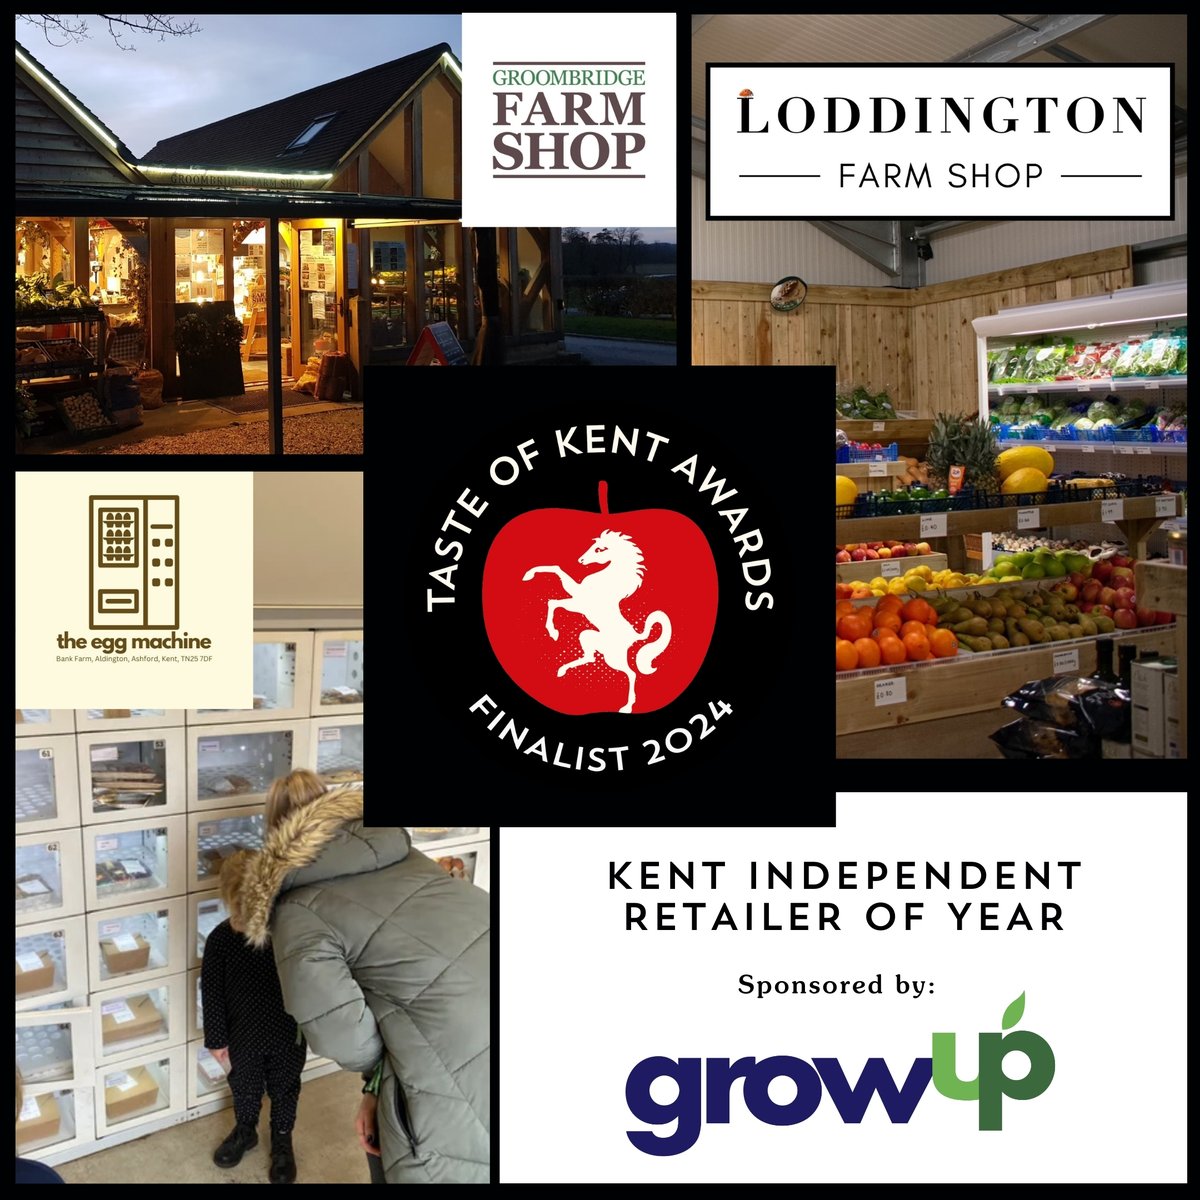 Kent Independent Retailer of the Year, Sponsored by: @Growup_Farms The finalists are: The Egg Machine, Aldington @GFarmShop, Tunbridge Wells @LoddingtonFarm Shop, Boughton Monchelsea Discover the other finalists, or come see them on 13th June, Canterbury: ow.ly/EoRh30sCtF9